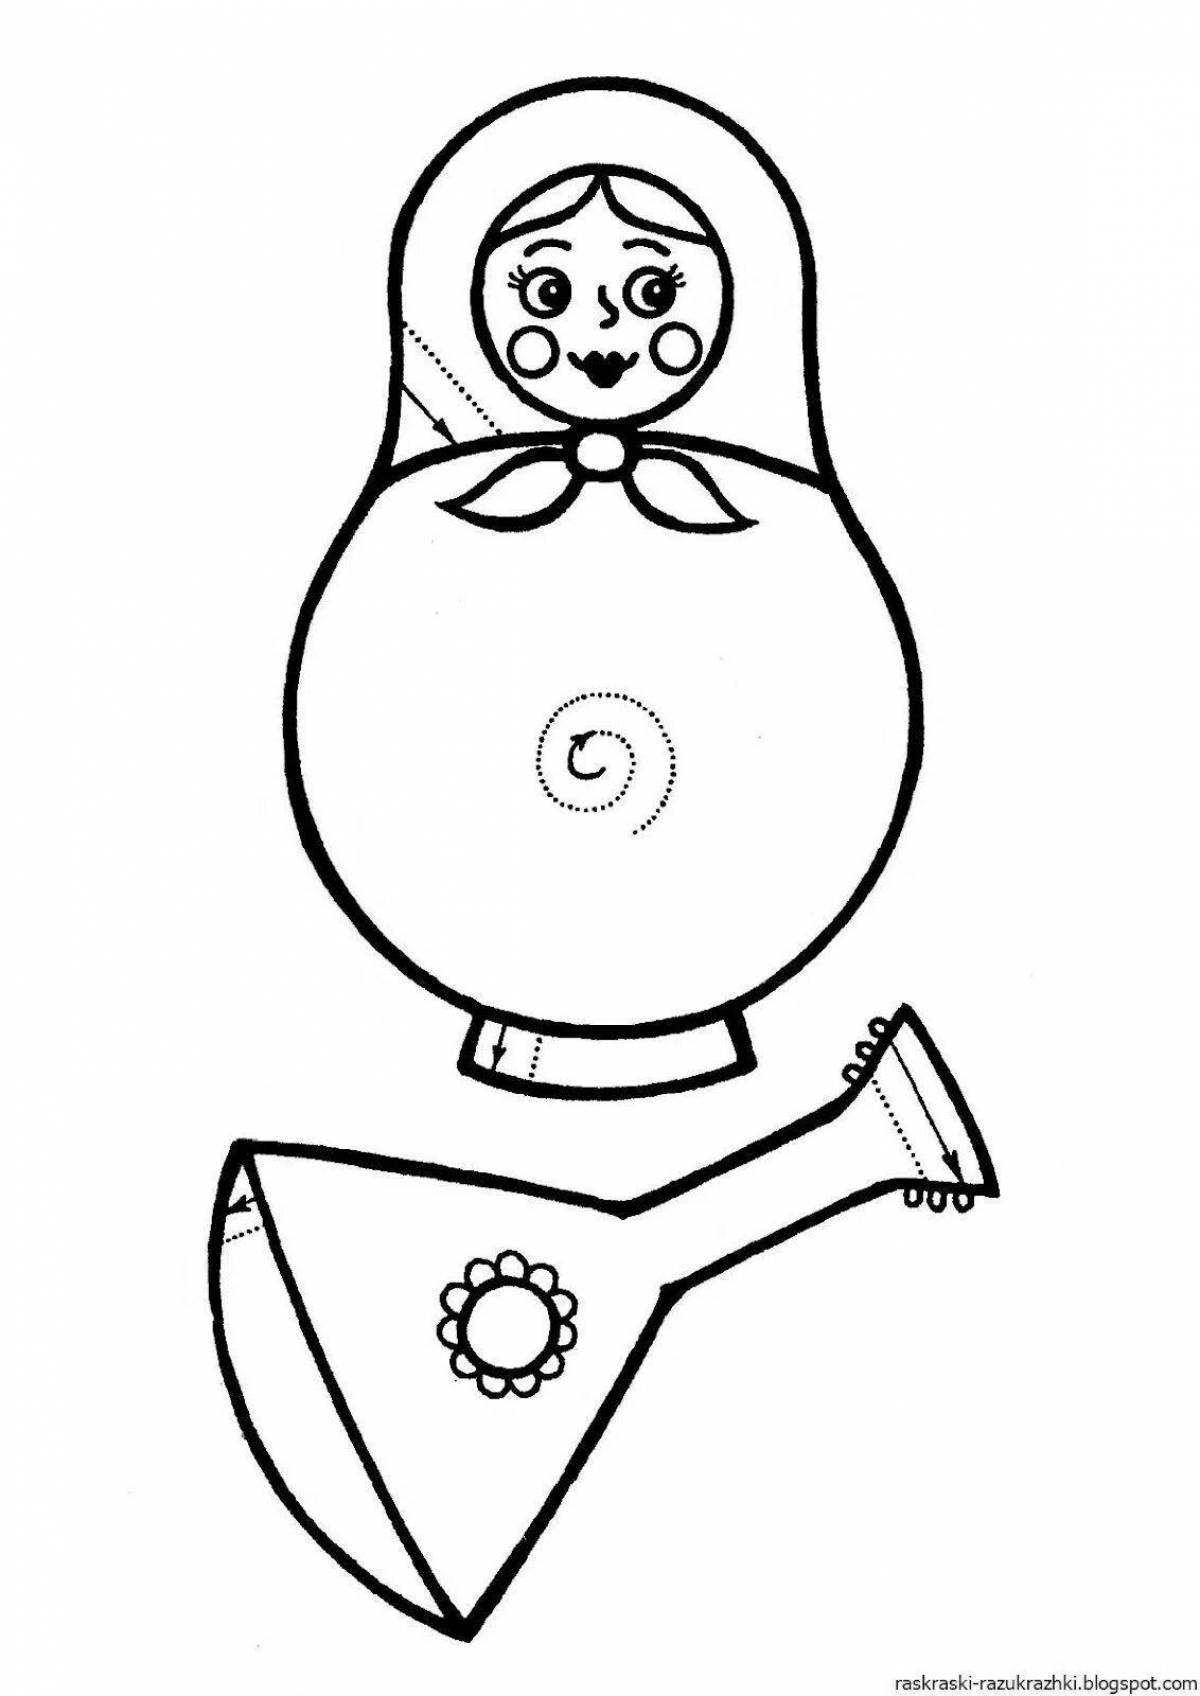 Adorable matryoshka coloring book for toddlers